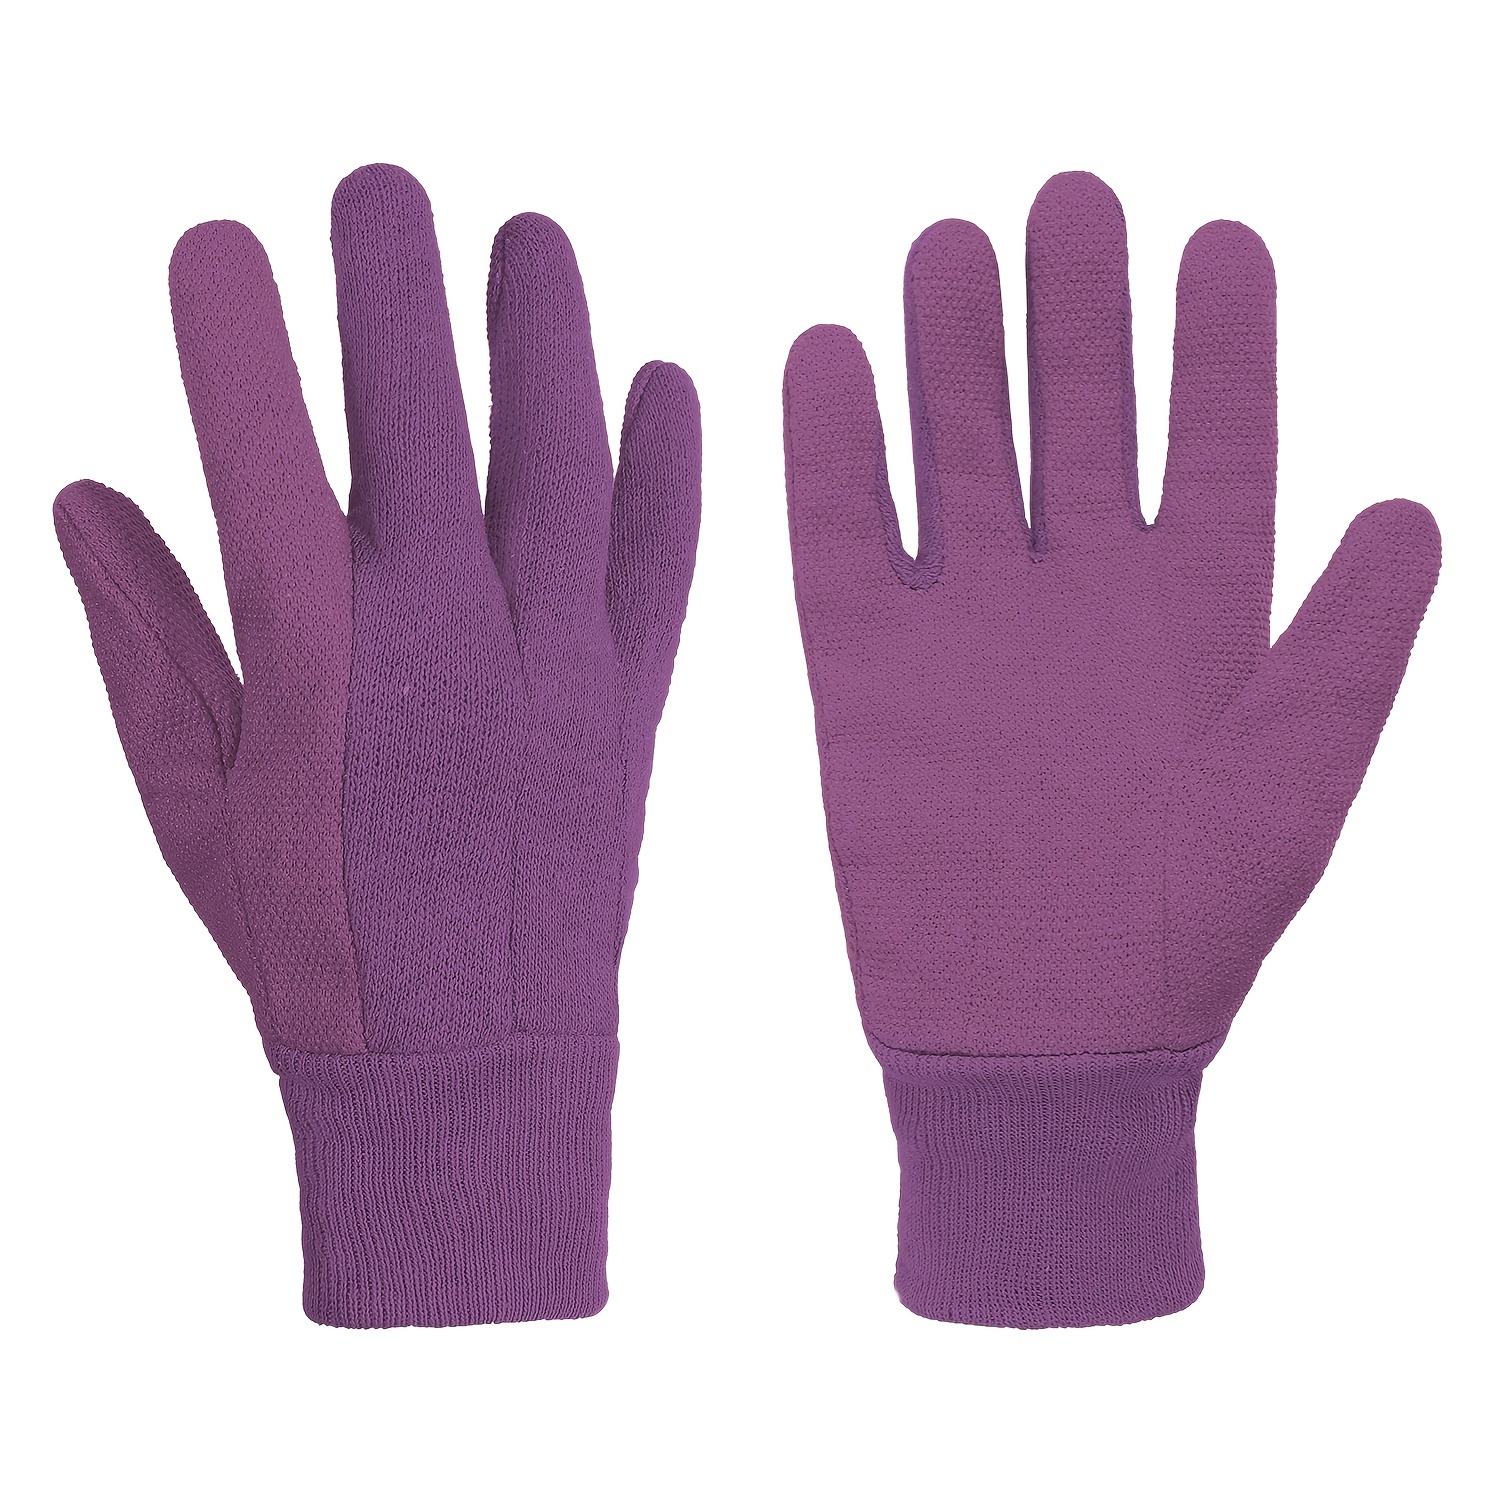 1 Pair Women Gardening Gloves with PVC Dots on Our Store